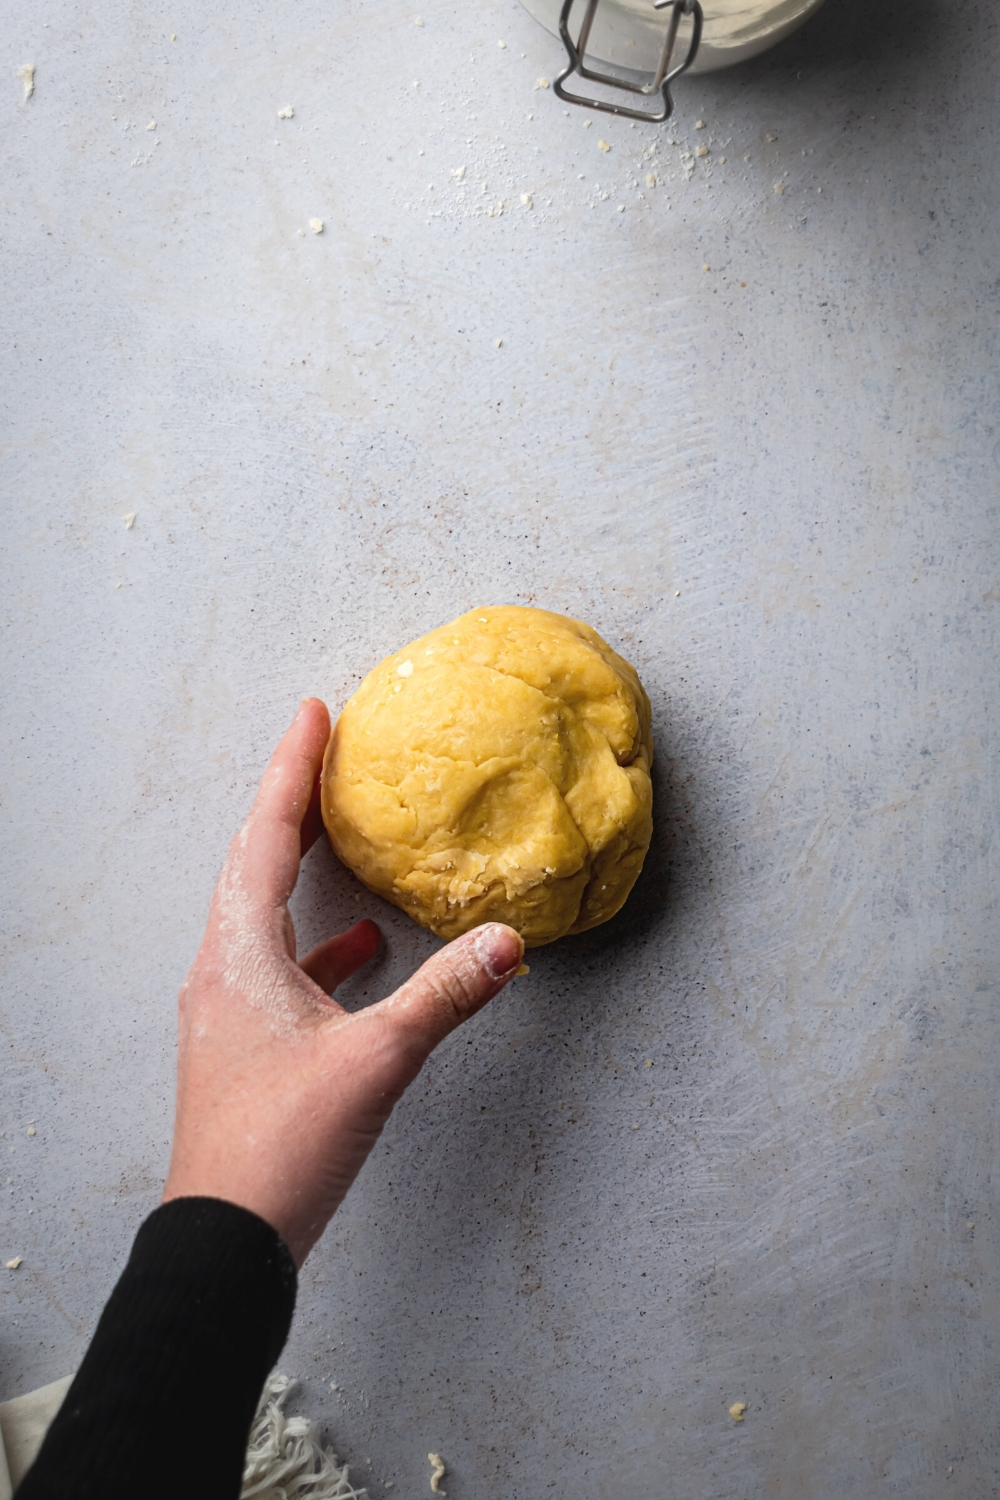 A hand holding a ball of dough on a gray counter.